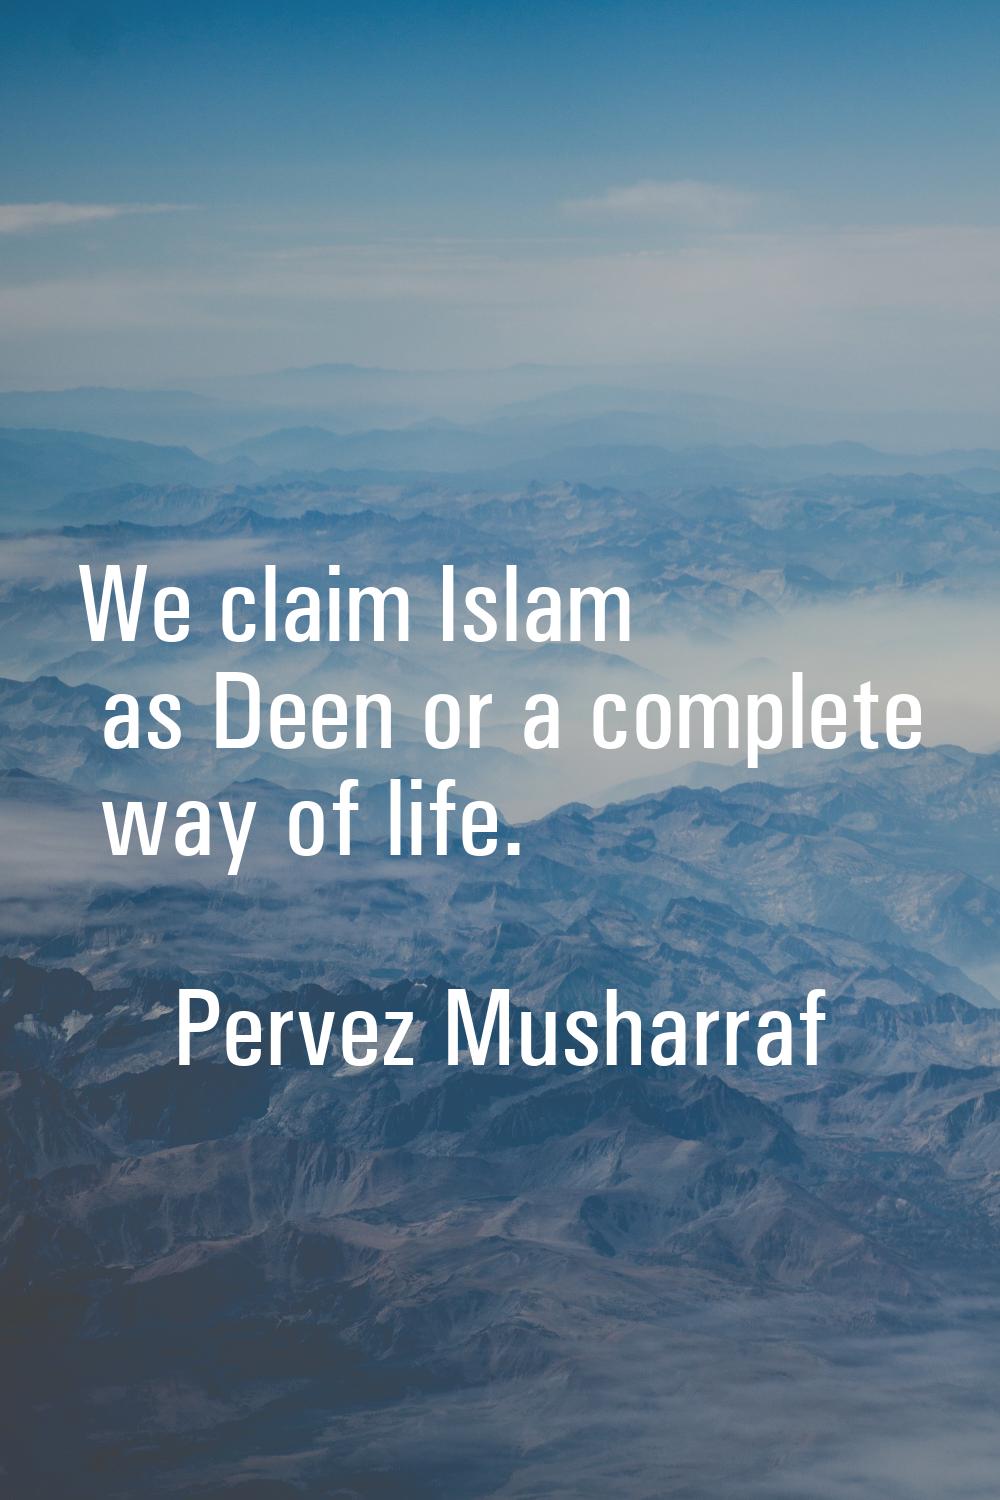 We claim Islam as Deen or a complete way of life.